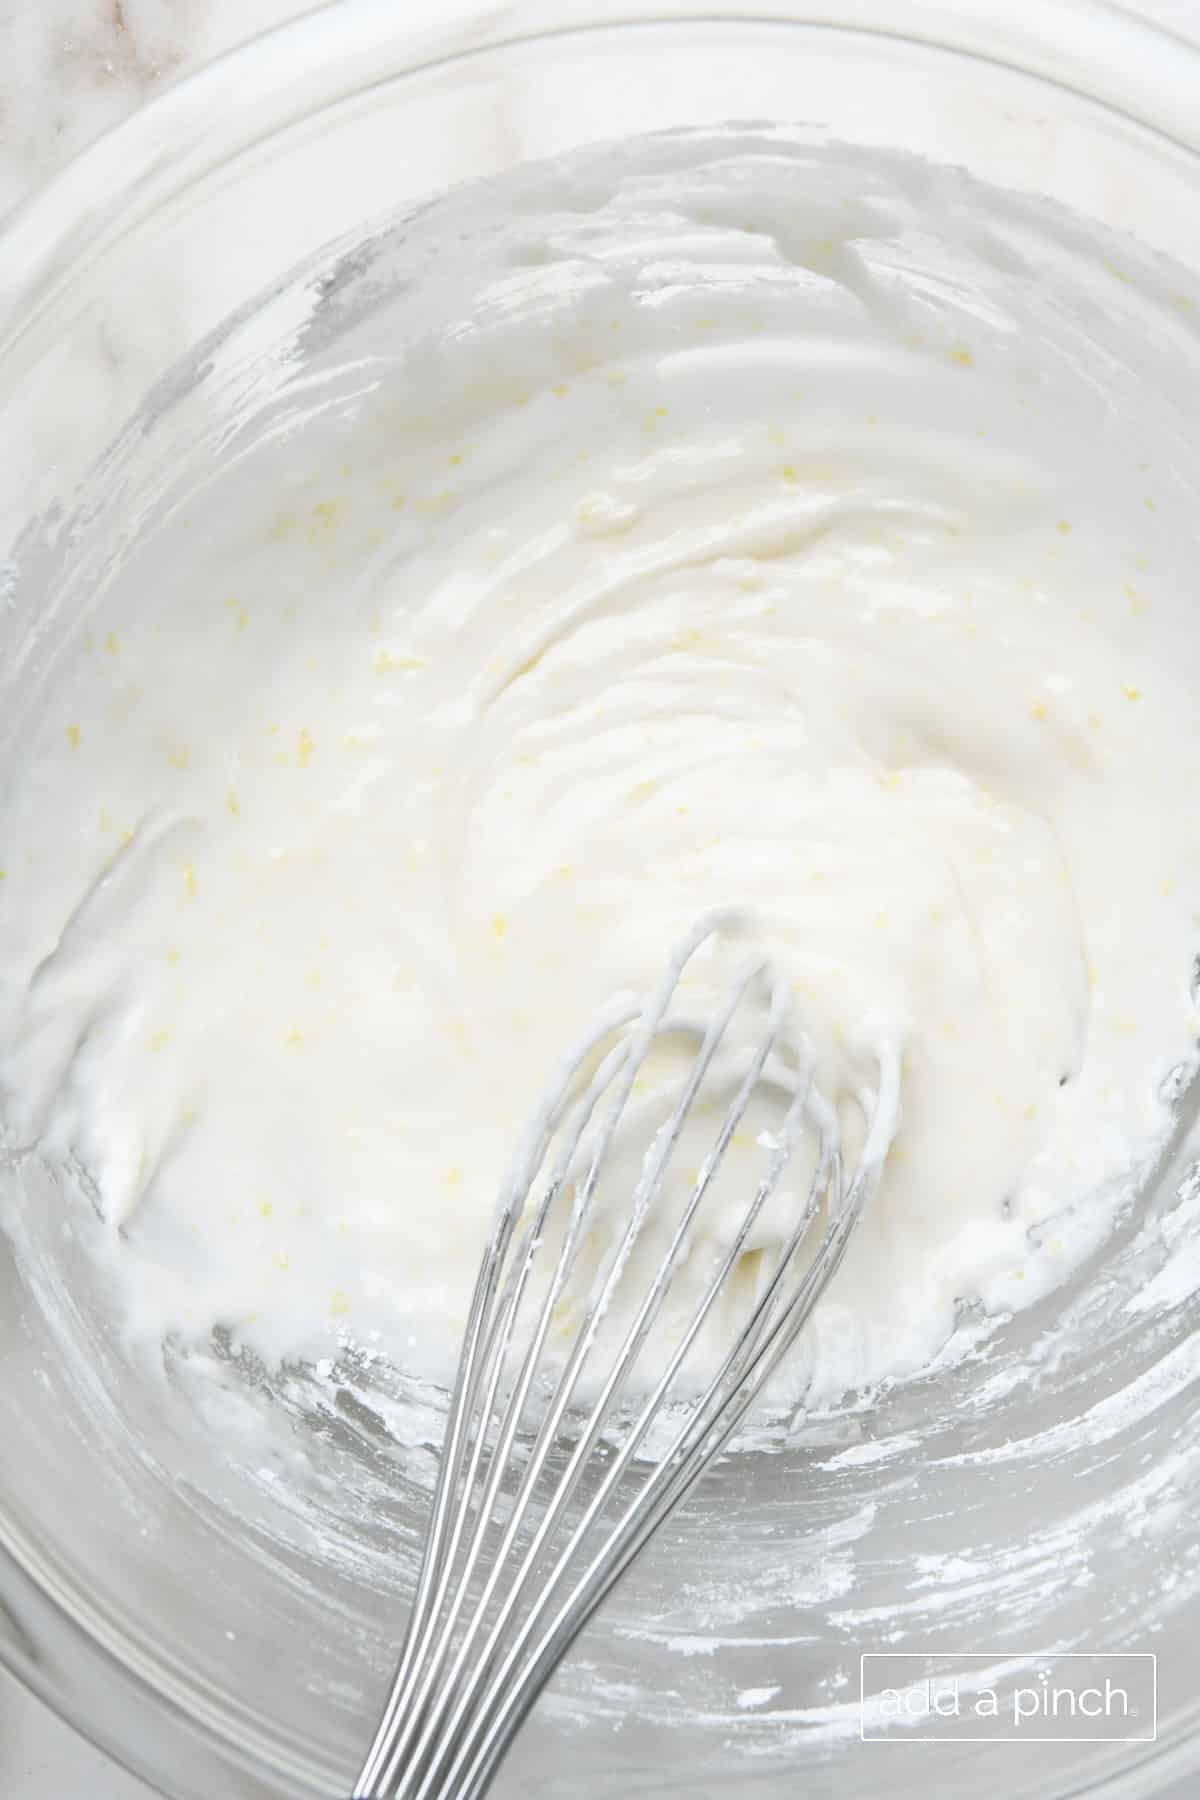 A wire whisk whips together the ingredients for the lemon buttermilk glaze in a glass mixing bowl.